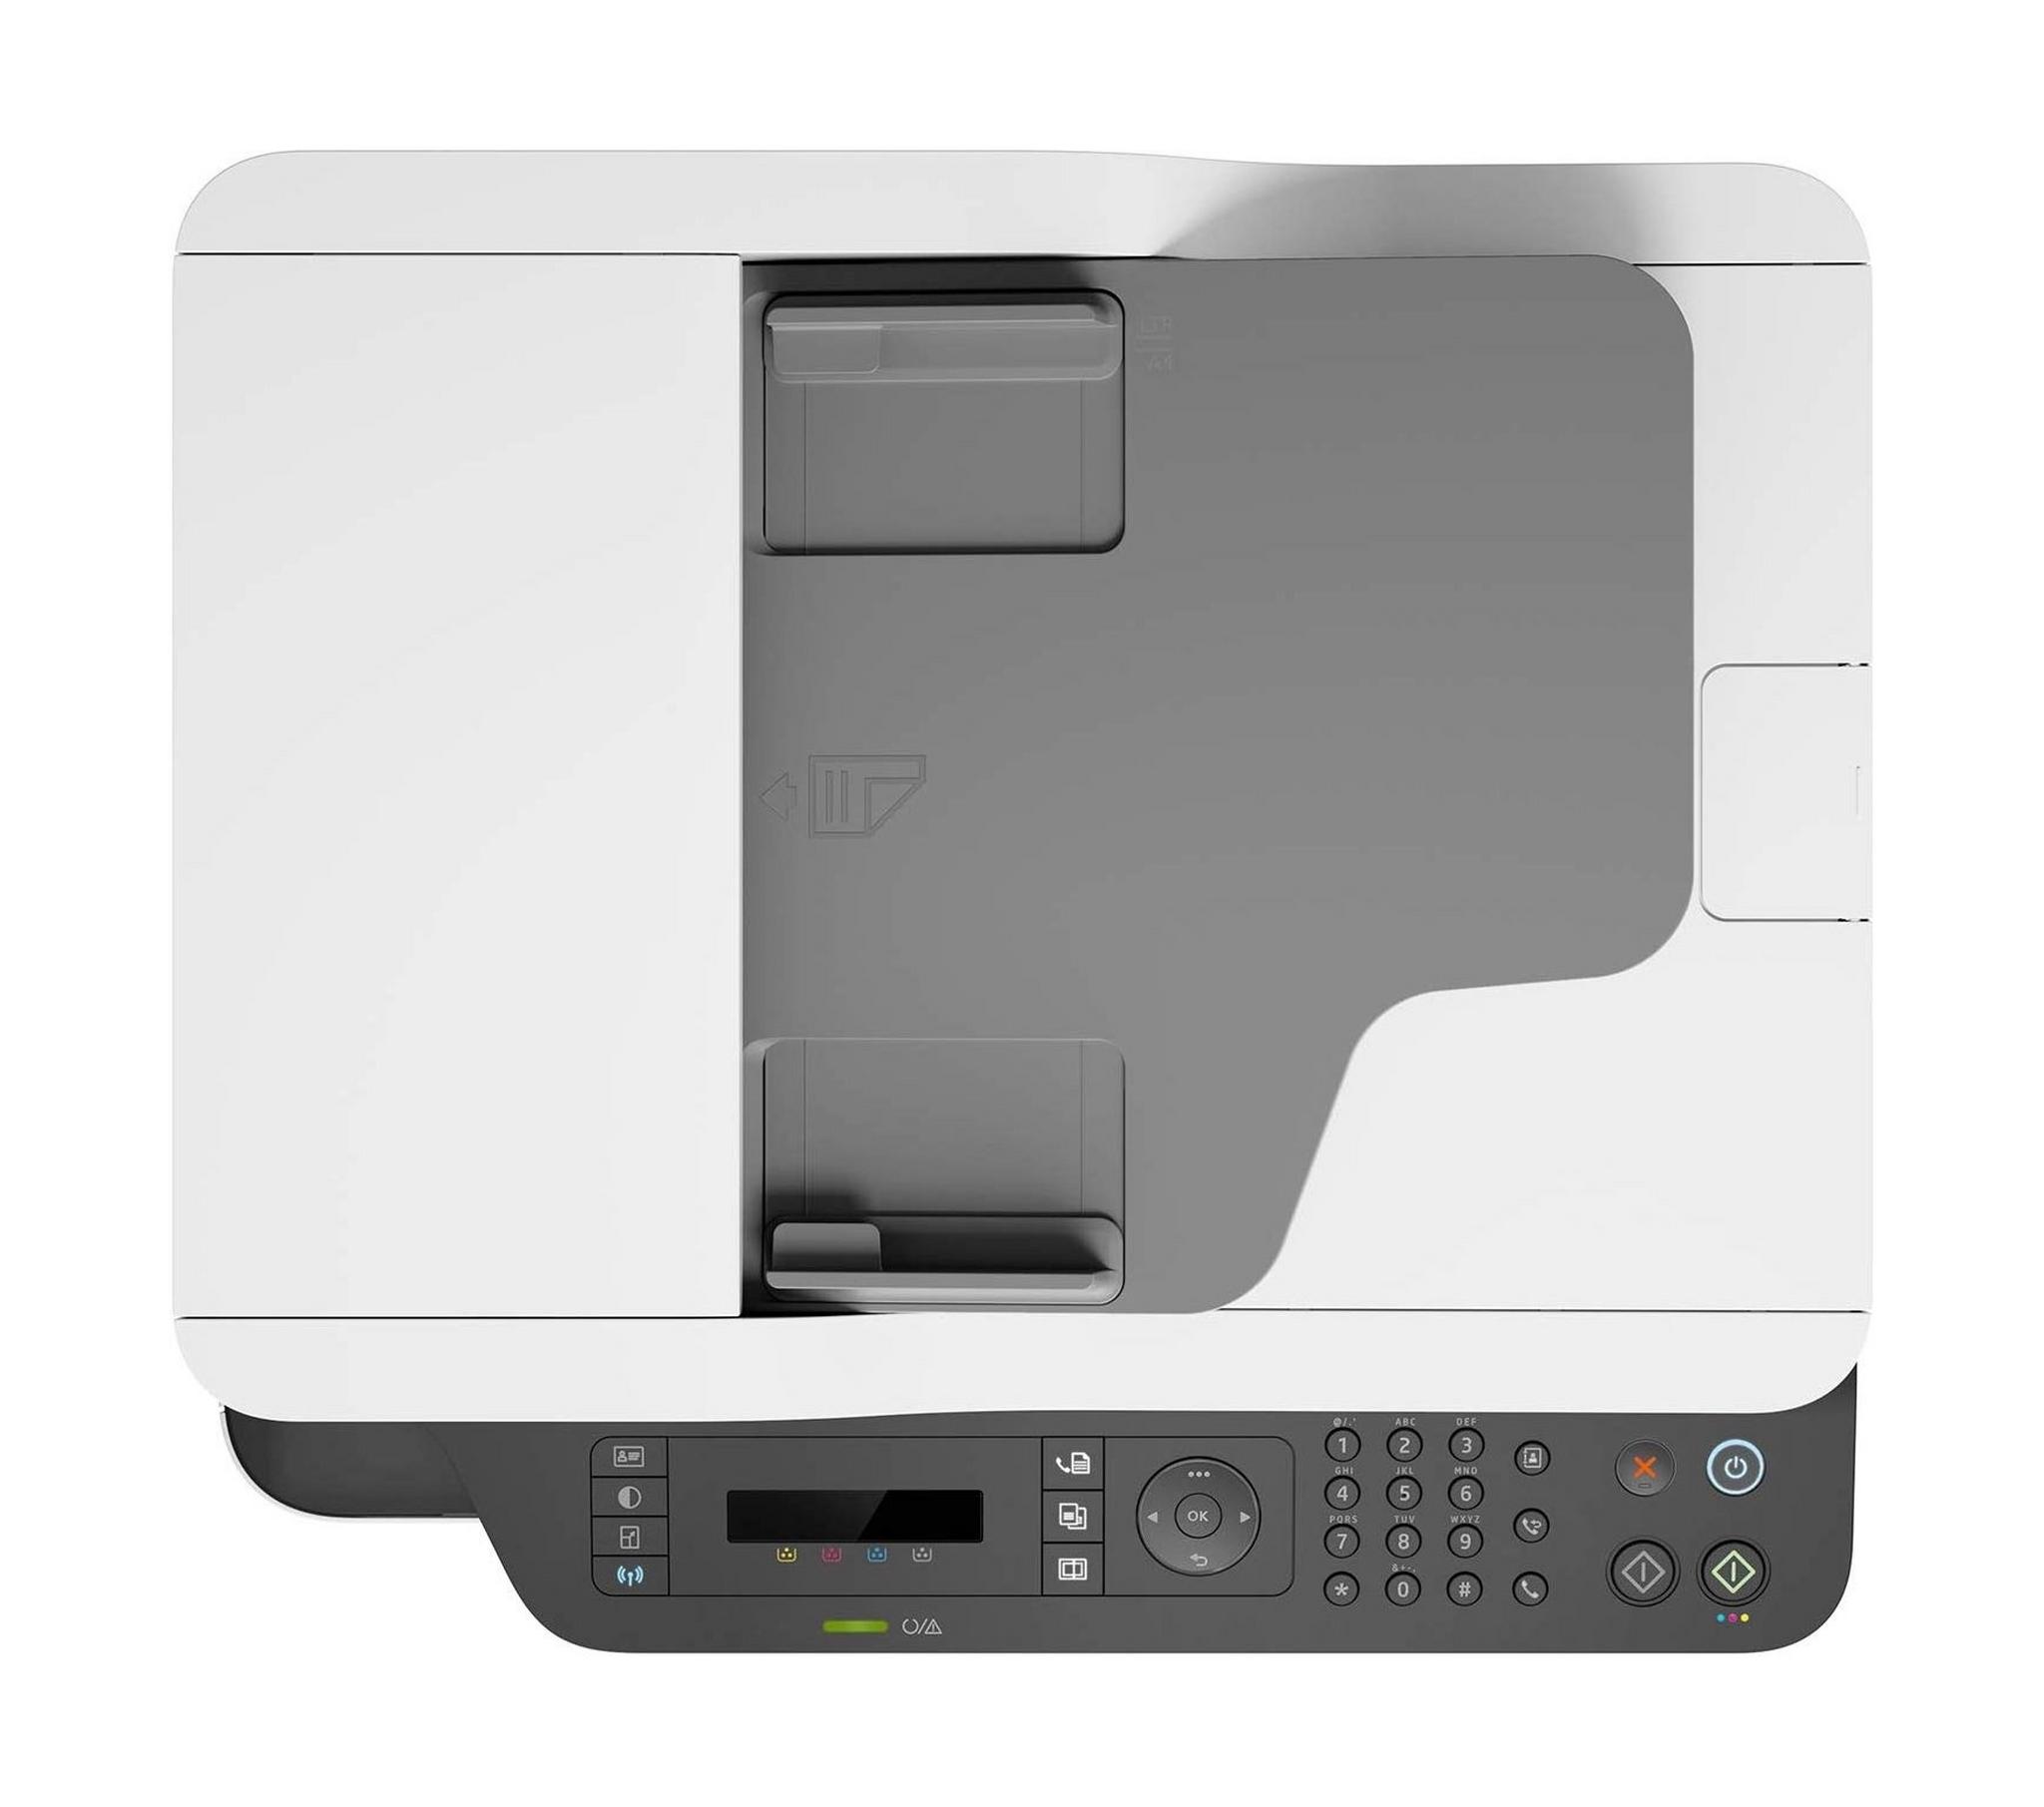 HP Color Laser Multi-function Printer 179fnw - (4ZB97A)